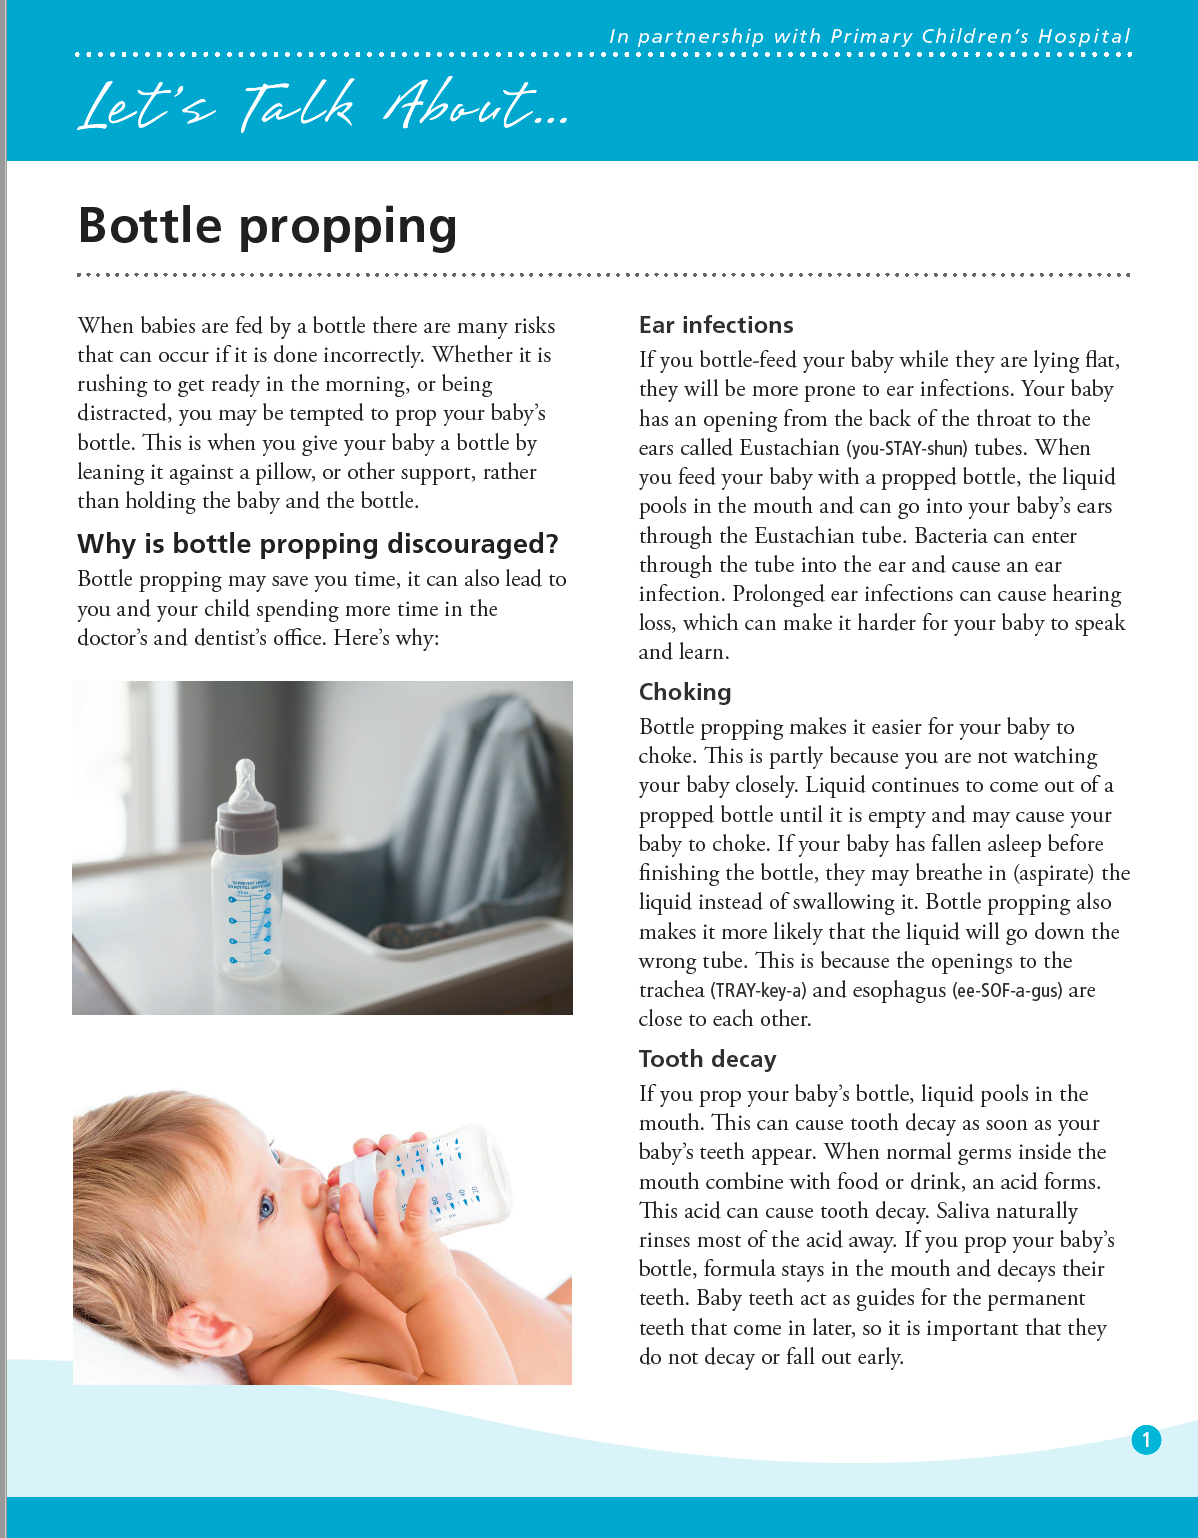 Let's talk about bottle propping